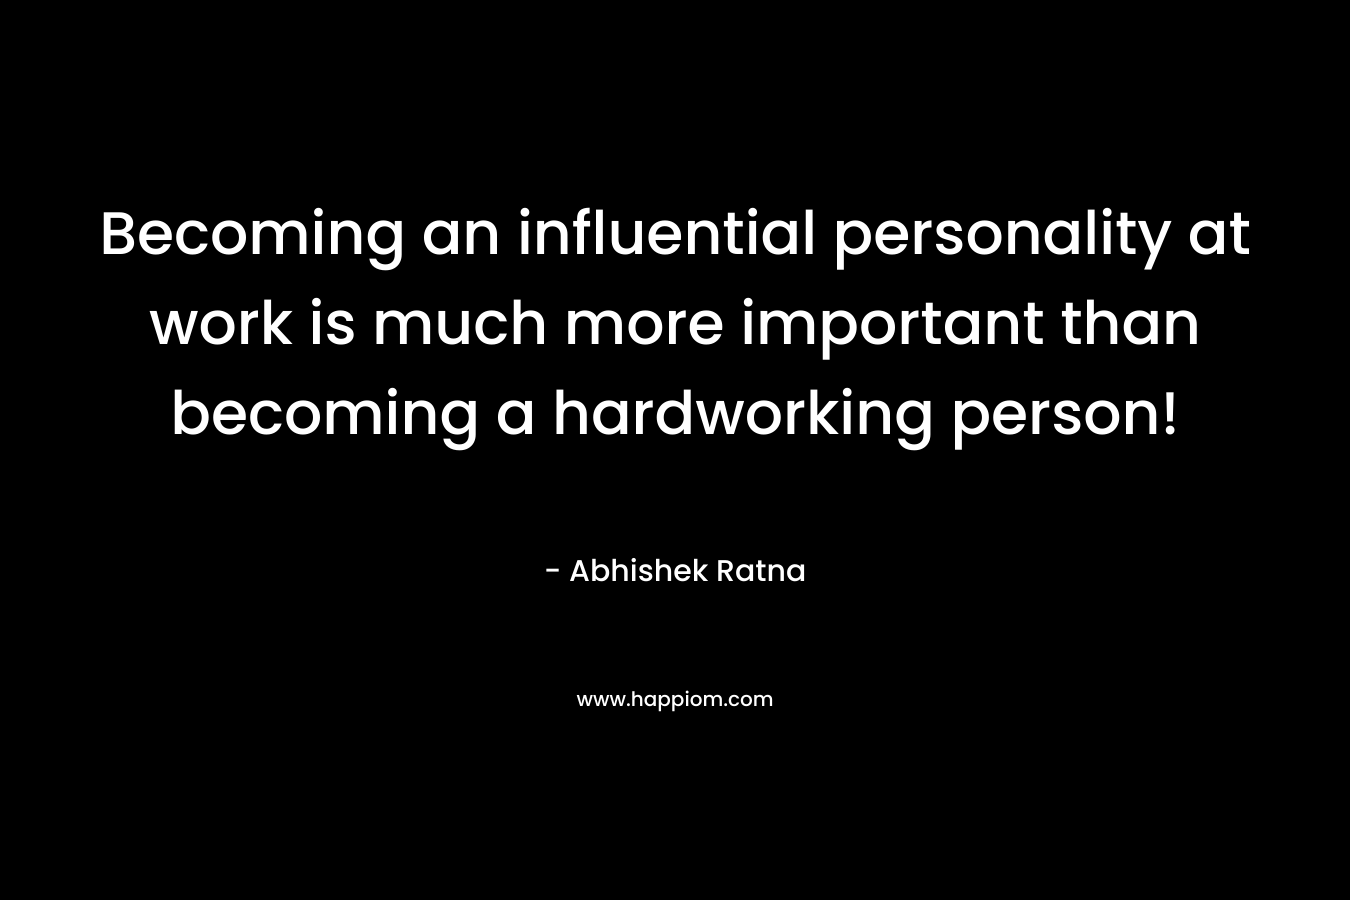 Becoming an influential personality at work is much more important than becoming a hardworking person! – Abhishek Ratna